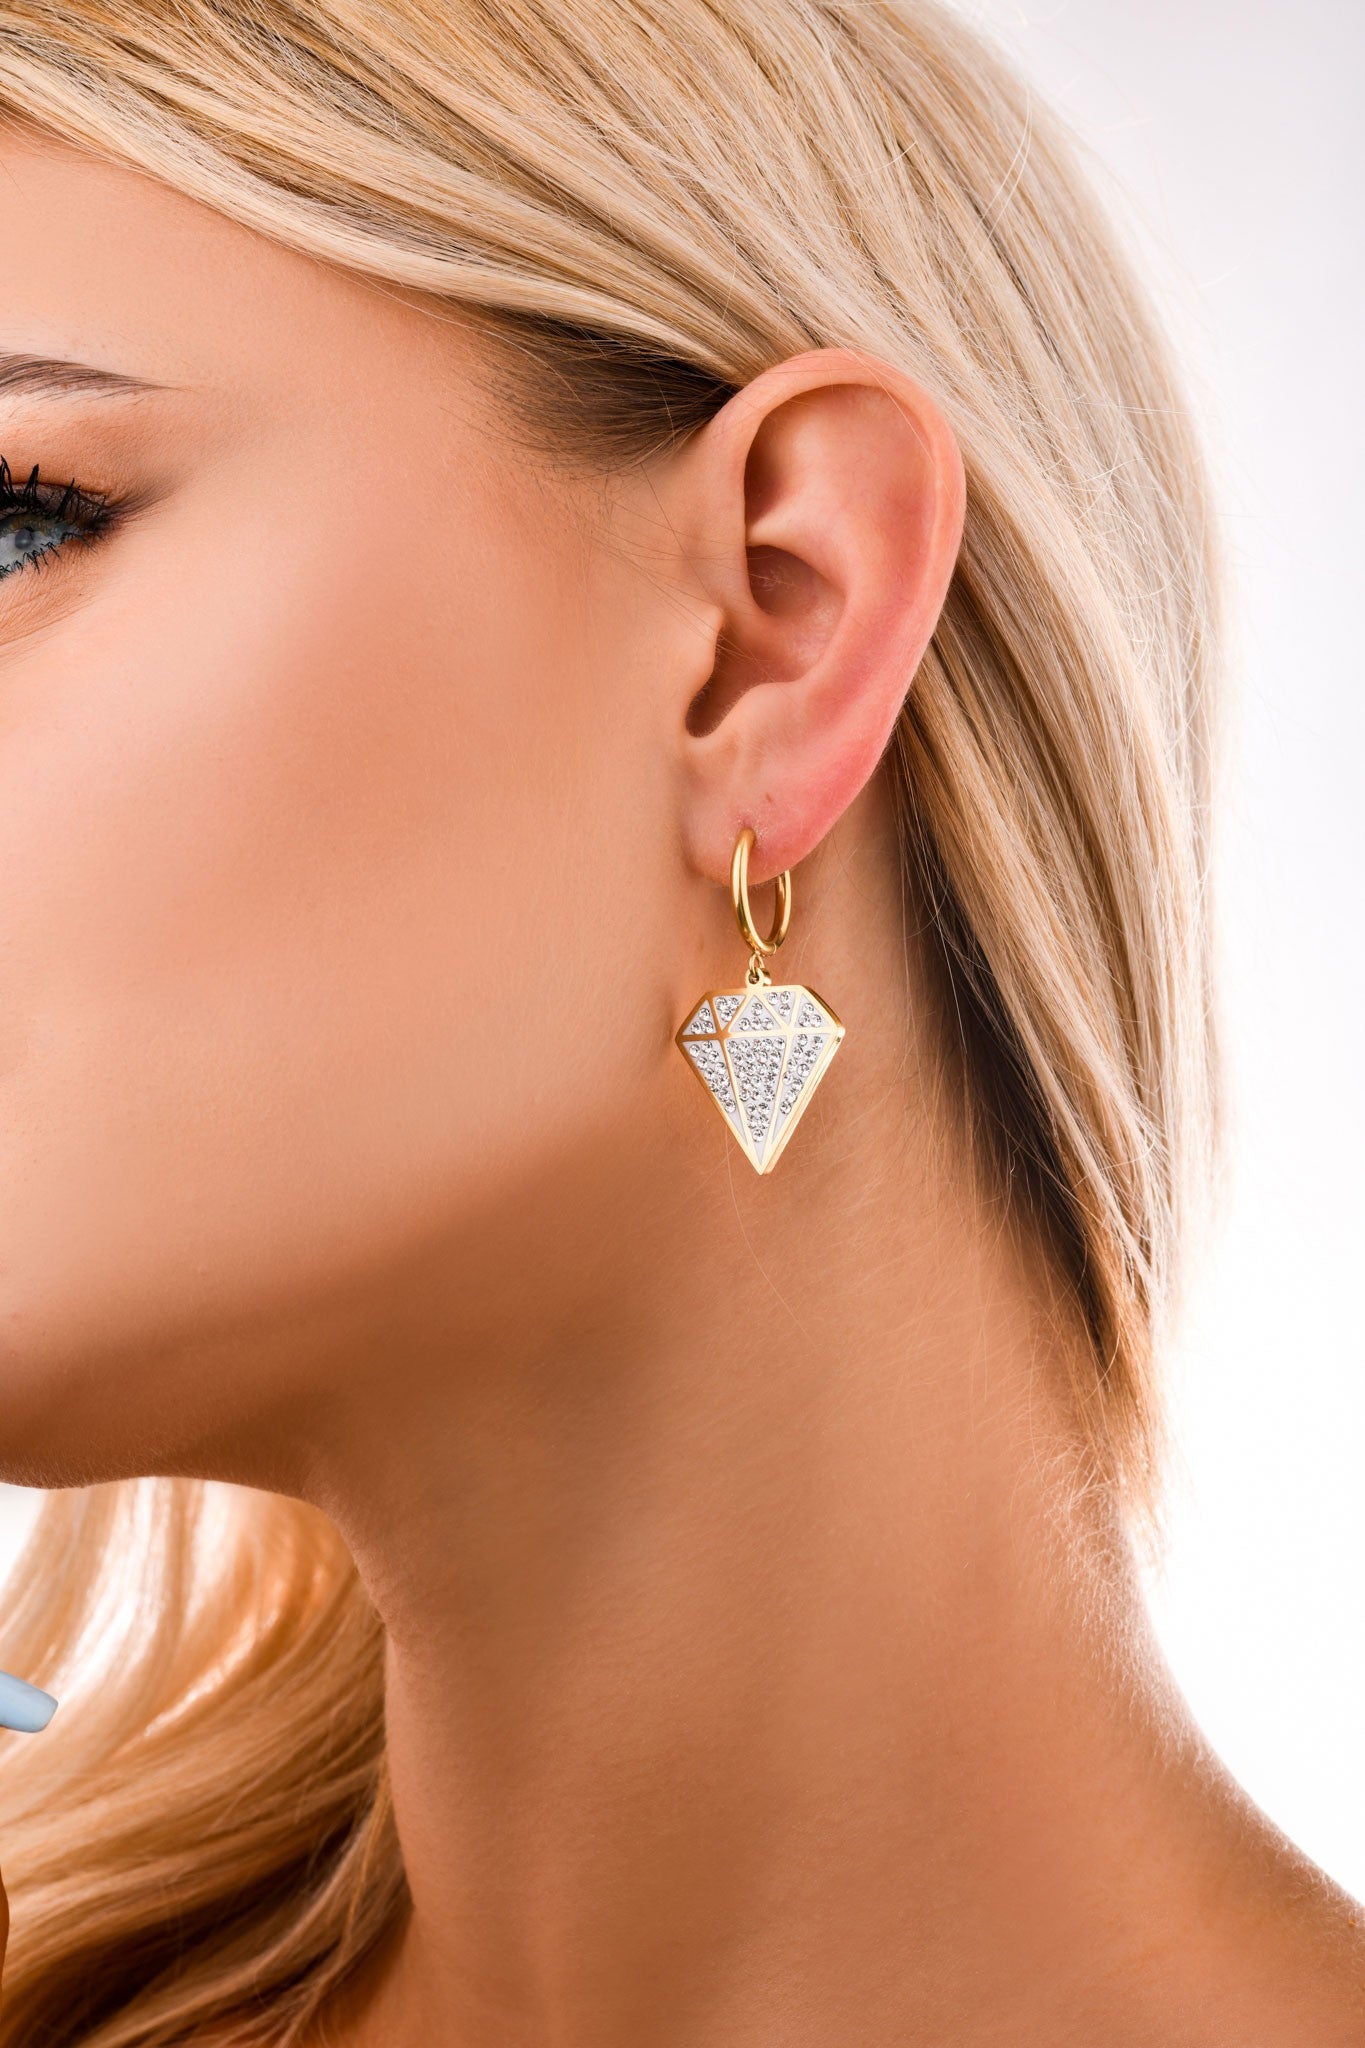 14k Gold Plated Diamond Earrings with Glass Crystal